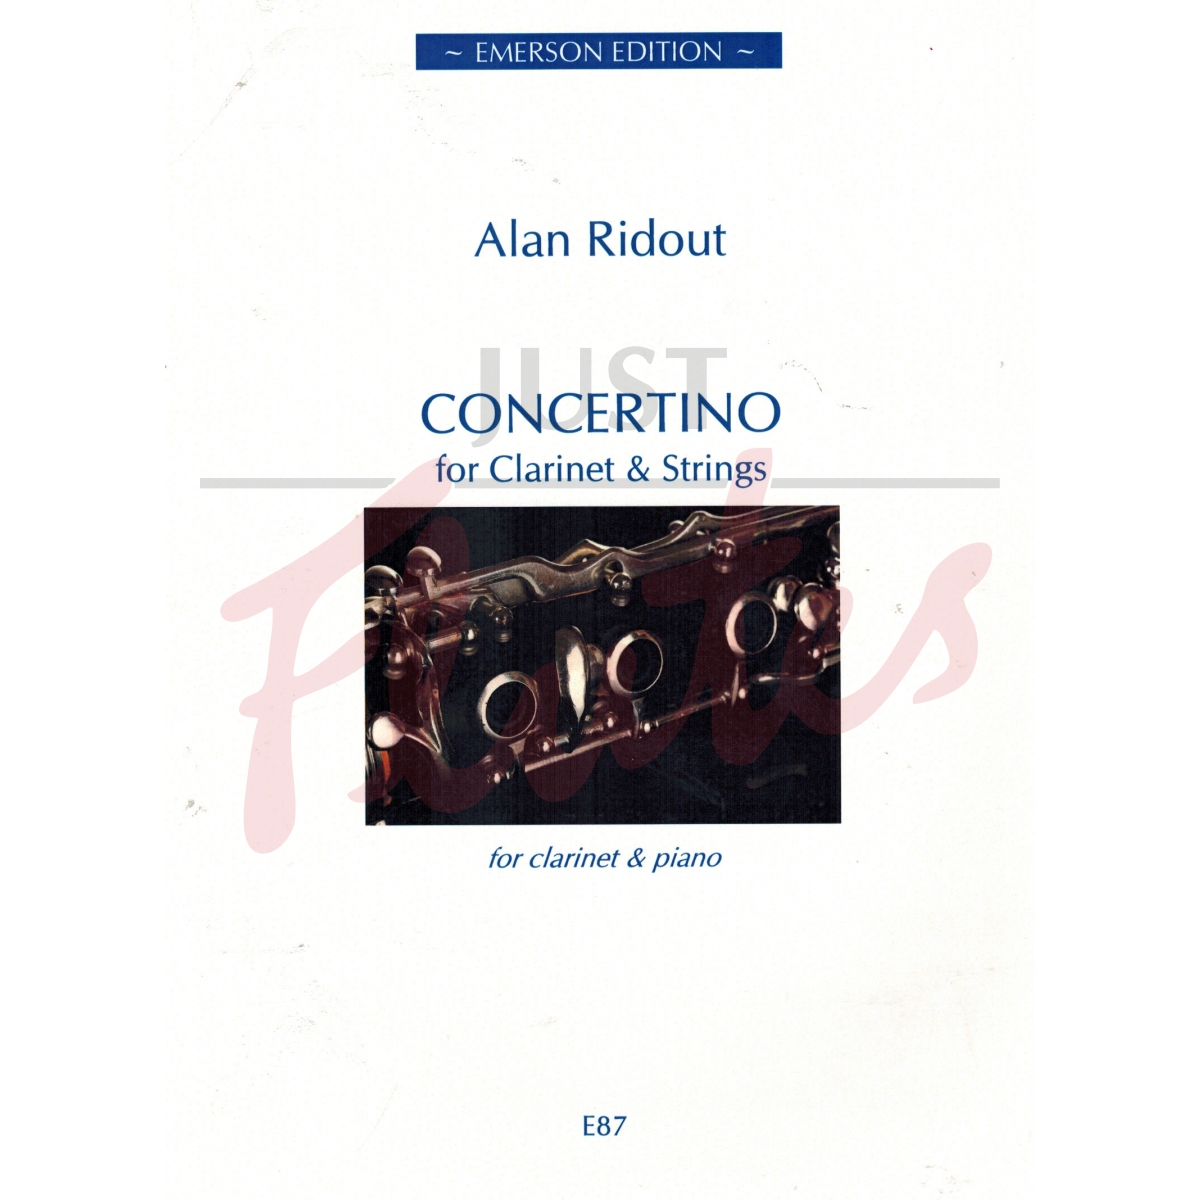 Concertino arranged for Clarinet and Piano